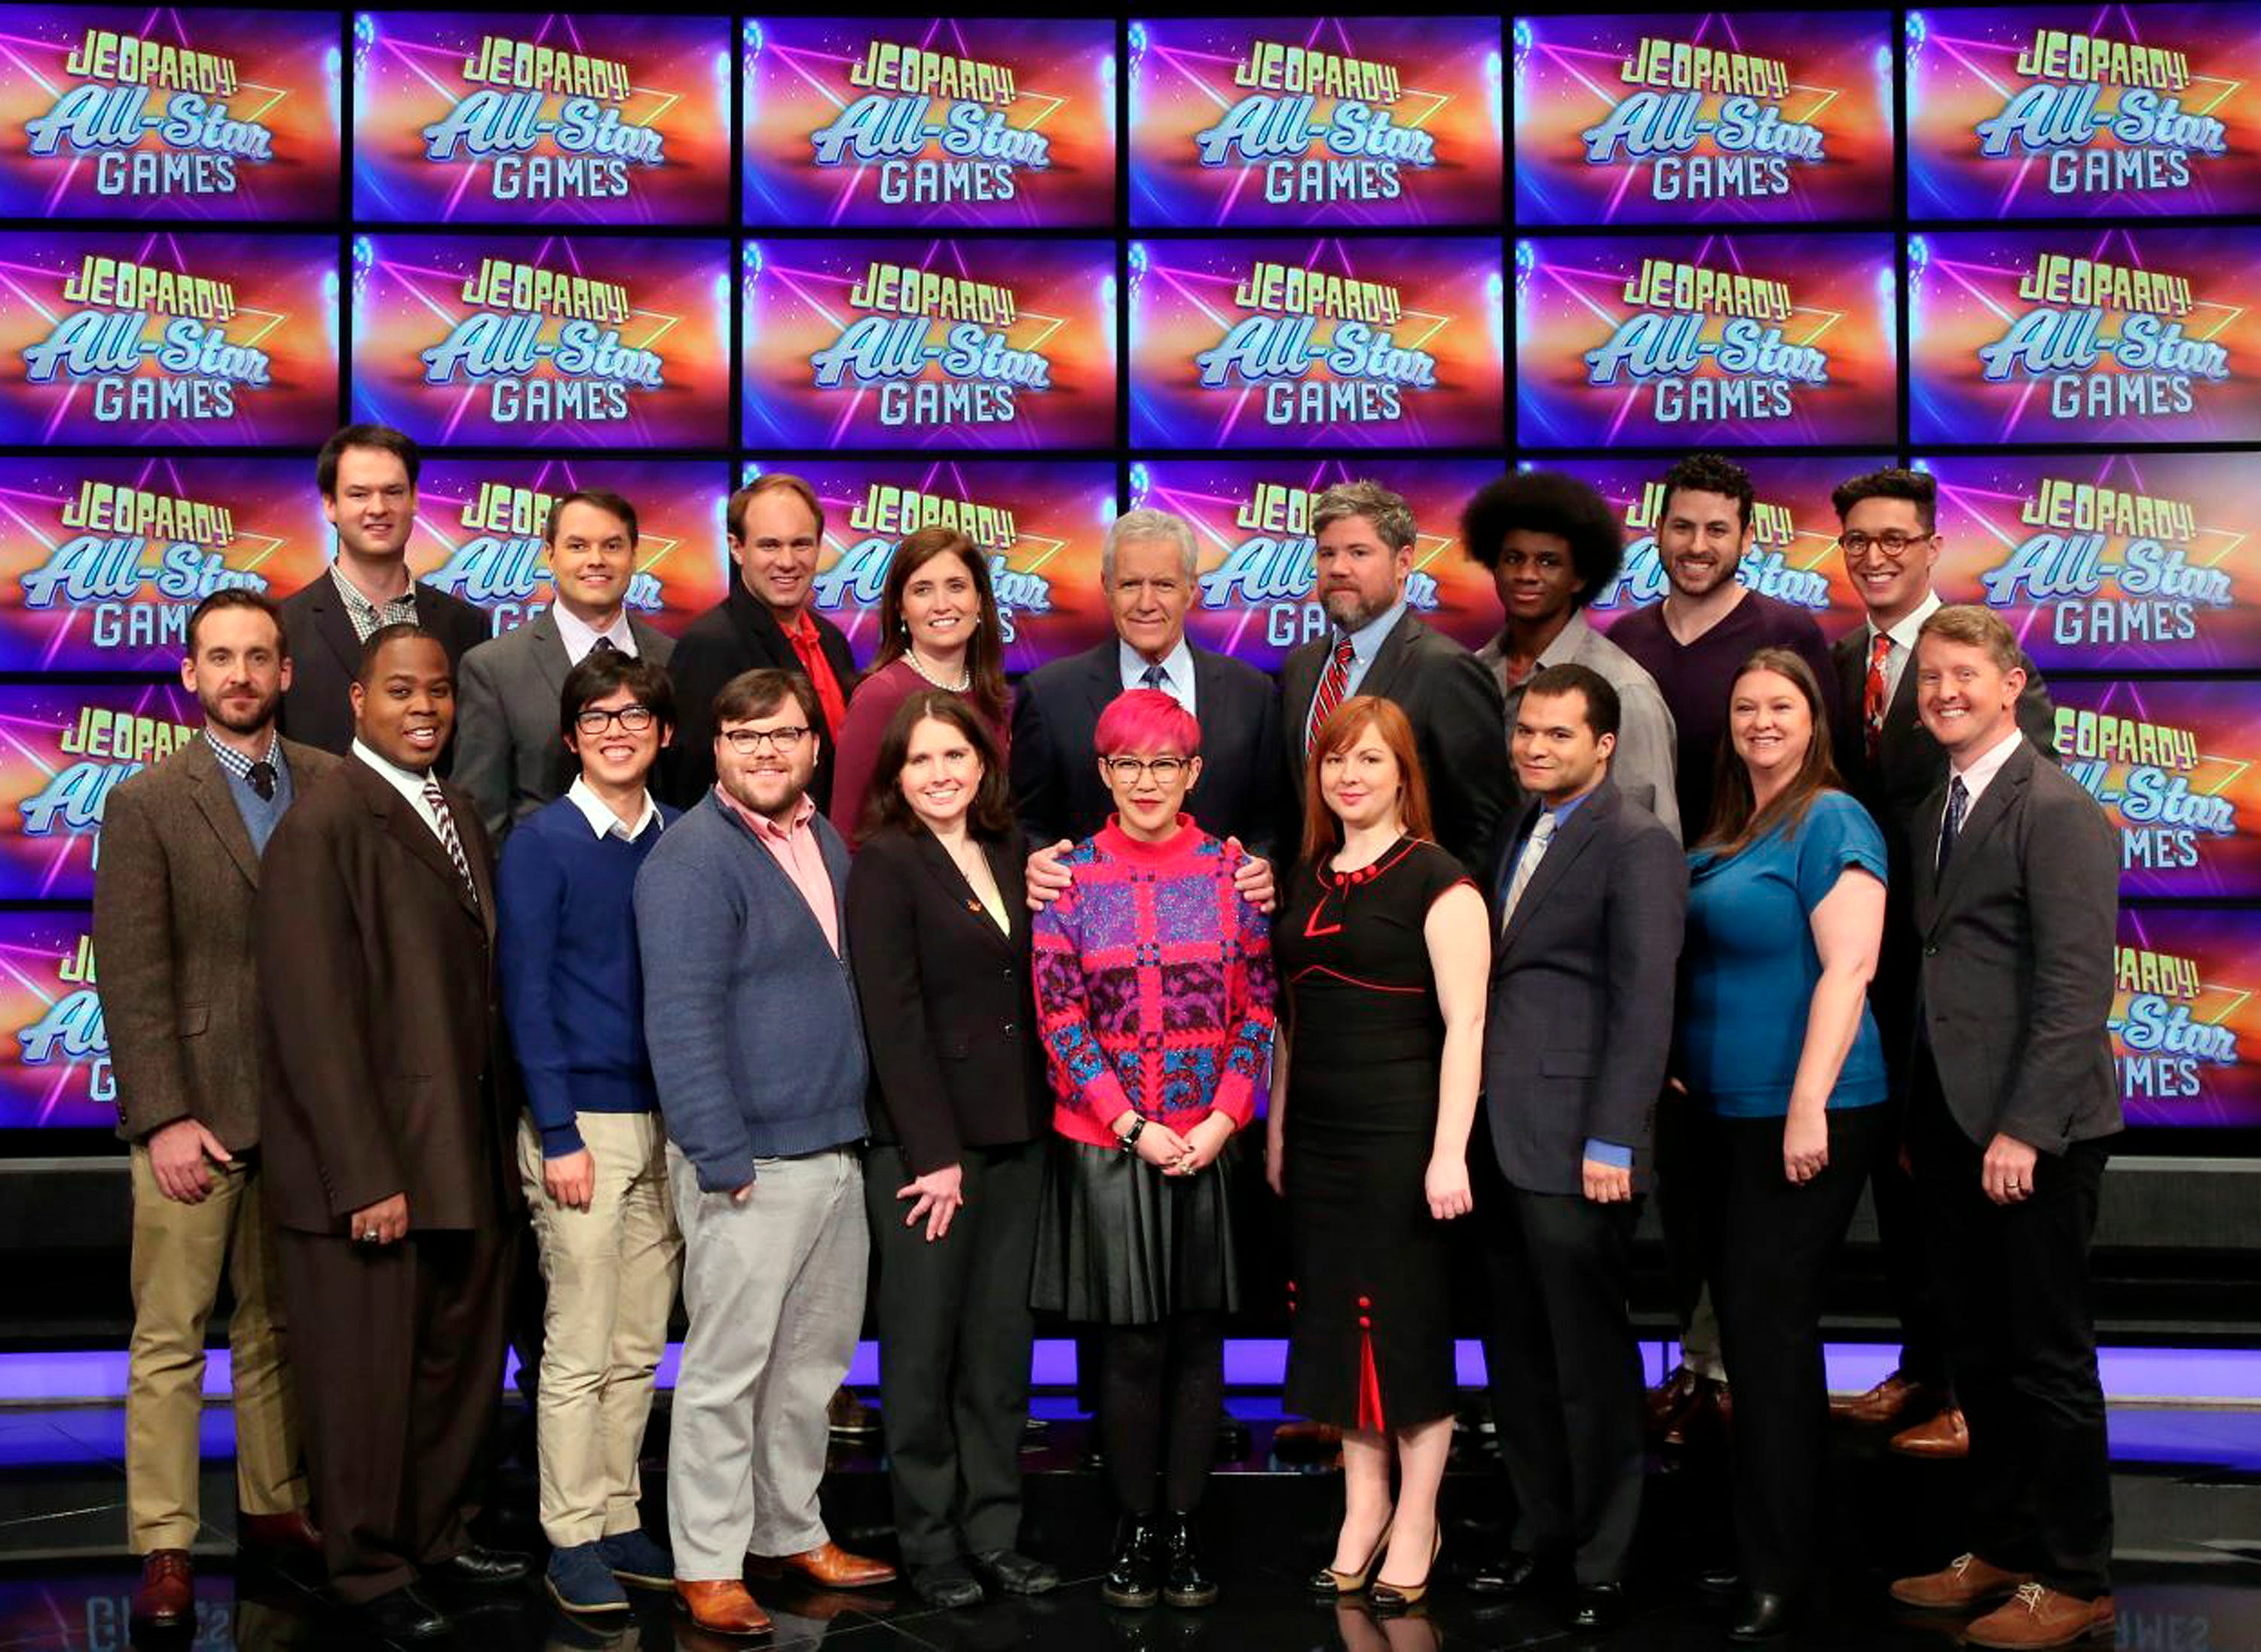 This image released by Jeopardy Productions, Inc. shows, front row from left, Brad Rutter, Colby Burnett, Alan Lin, Seth Wilson, Larissa Kelly, Monica Thieu, Pam Mueller, Matt Jackson, Jennifer Giles and Ken Jennings, back row from left, Ben Ingram,  Roger Craig, David Madden, Julia Collins, host Alex Trebek, Austin Rogers, Leonard Cooper, Alex Jacob and Buzzy Cohen on the set of the game show "Jeopardy!"